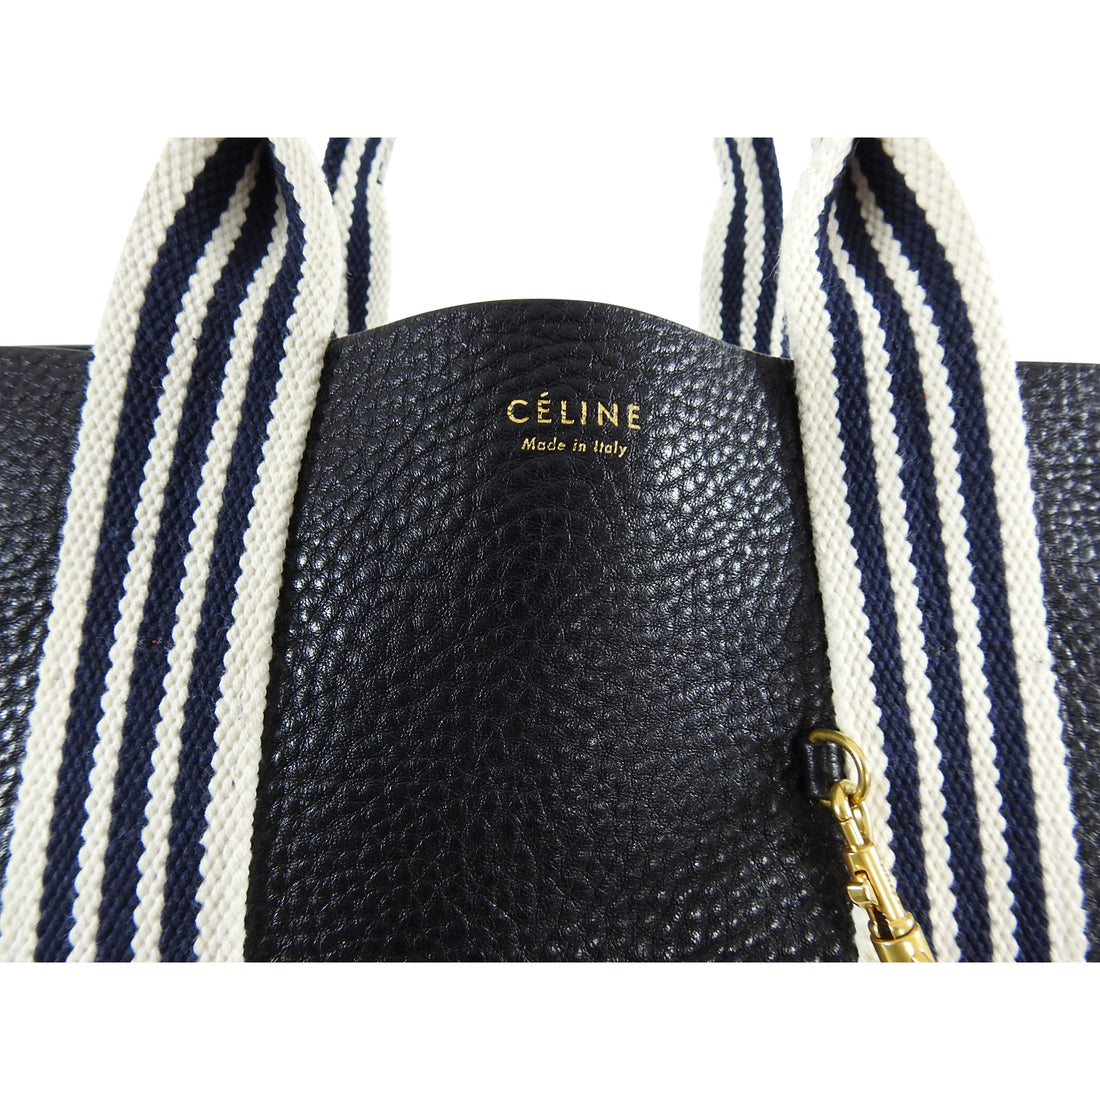 Celine Black Pebbled Leather Tote with Canvas Striped Straps